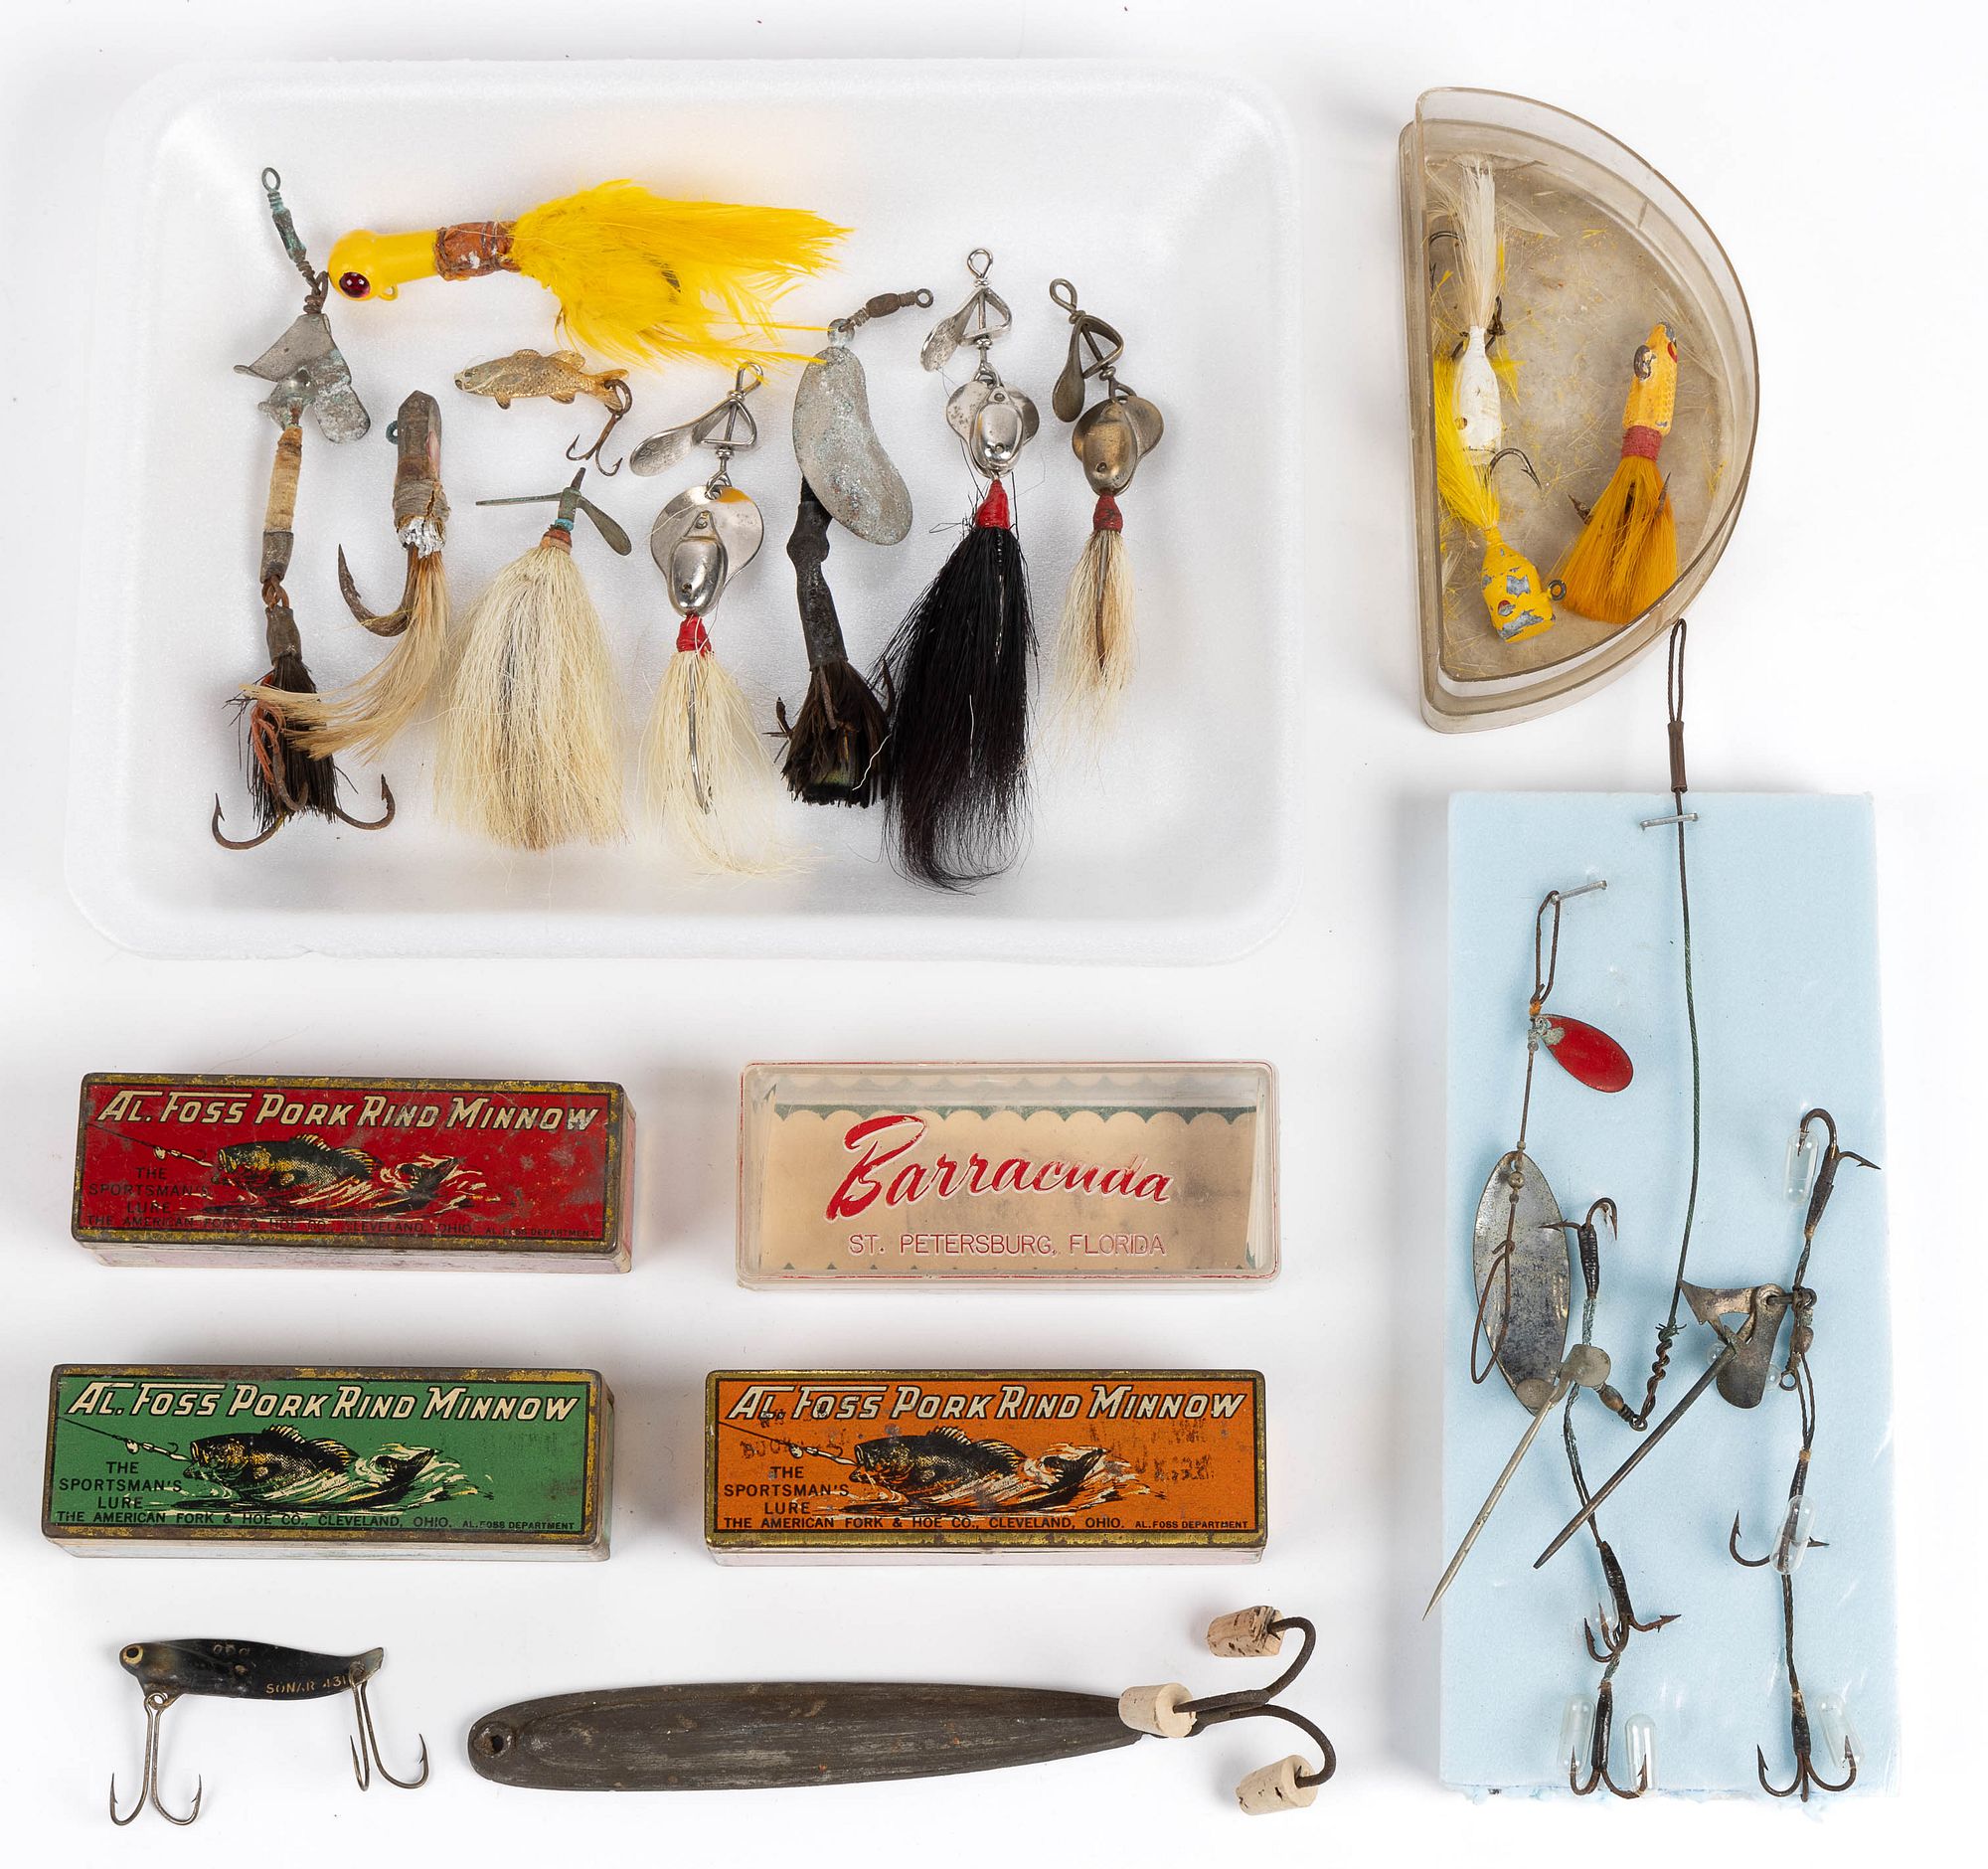 ANTIQUE / VINTAGE METAL FISHING LURES / JIGS AND OTHER ARTICLES